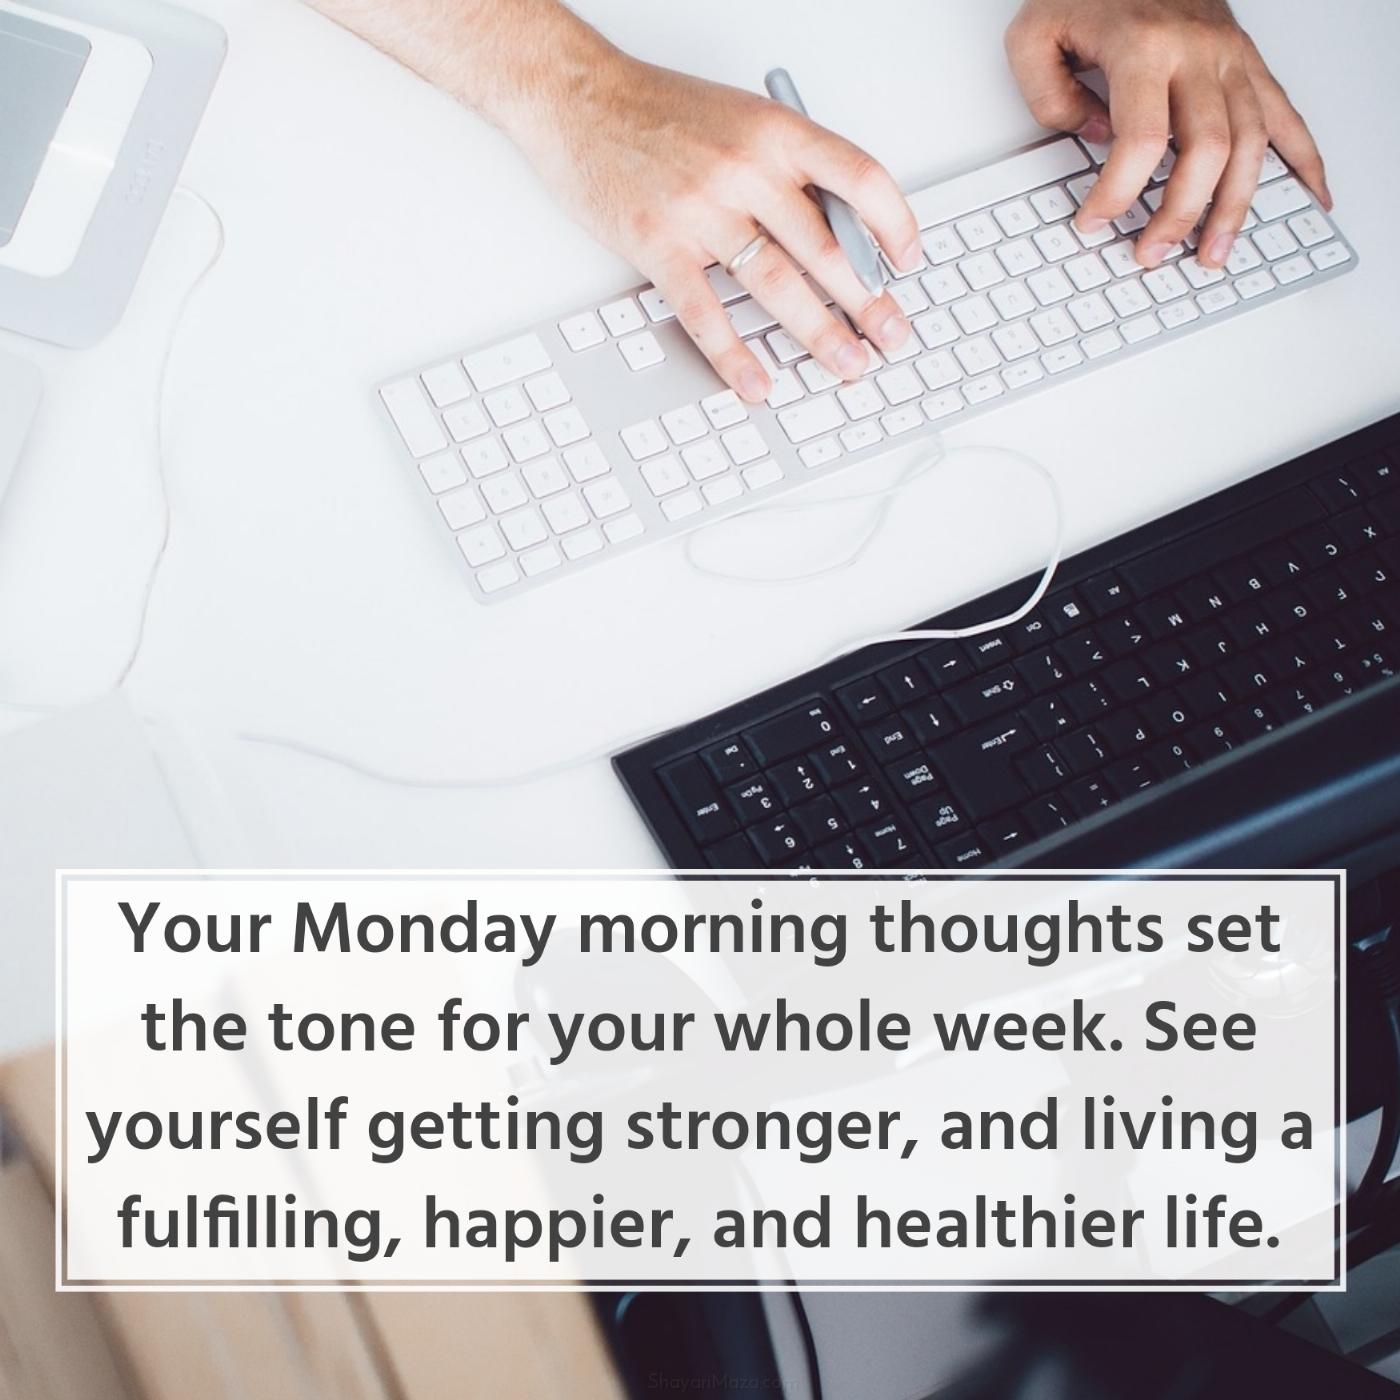 Your Monday morning thoughts set the tone for your whole week